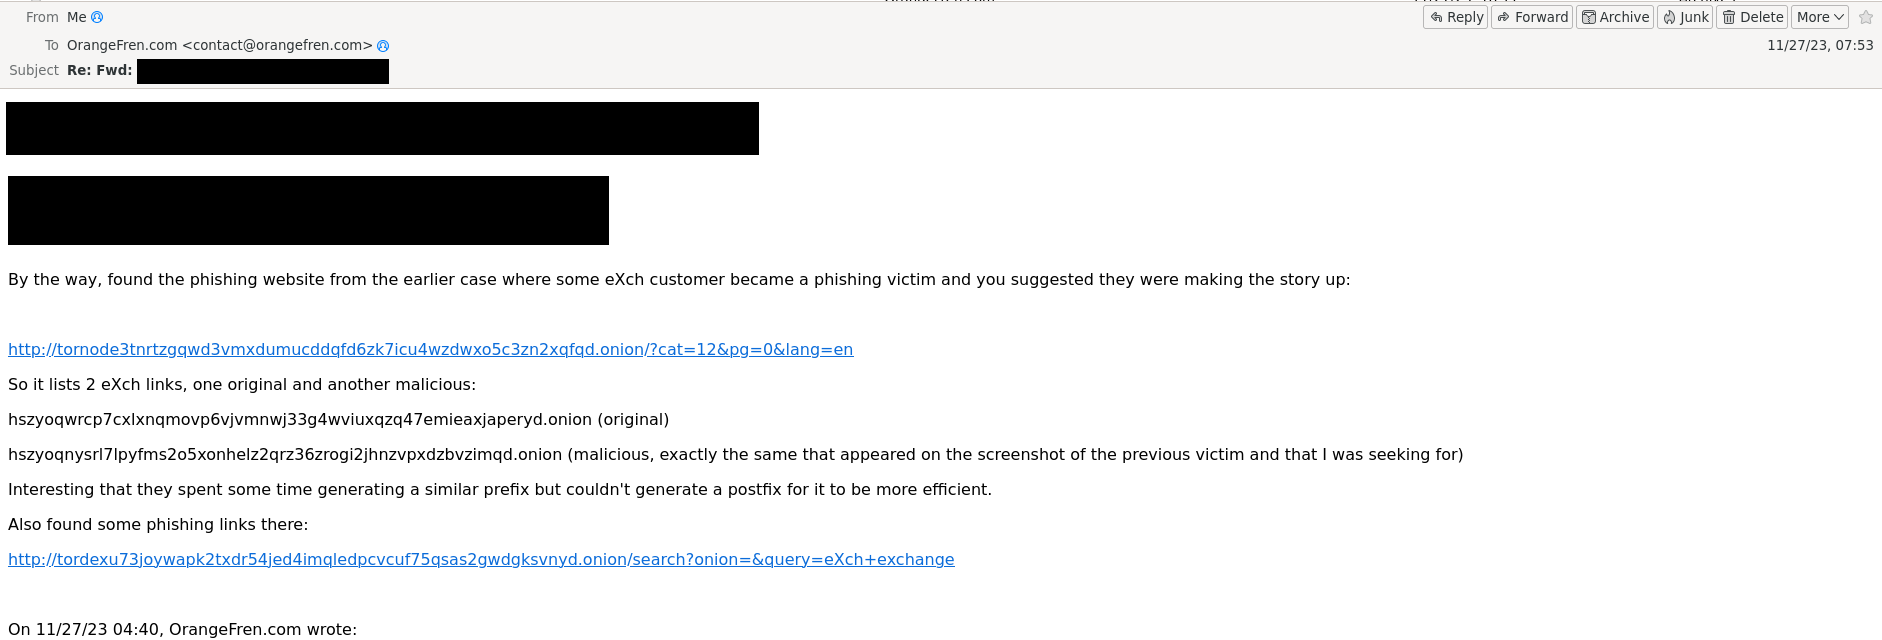 A screenshot of the email from eXch to OragenFren in regards to found phishing links